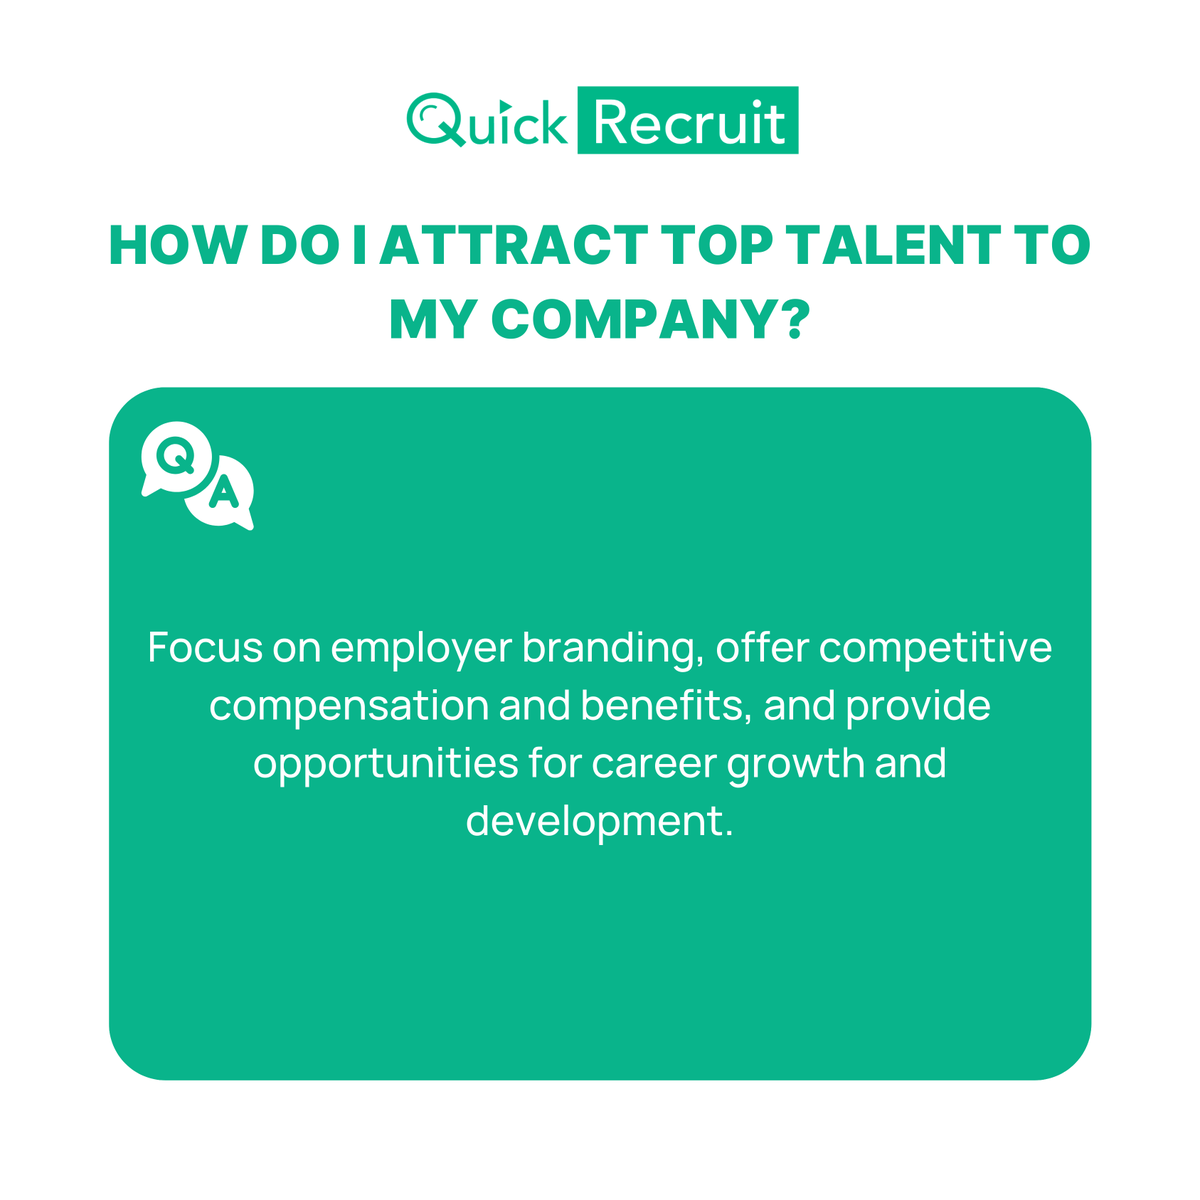 Attracting Top Talent: Key Strategies for Your Company's Success!
Use our tool to increase your productivity: quickrecruit.com
#interviewasaservice #QuickRecruit #virtualinterviews #frequentlyaskedquestions #questions